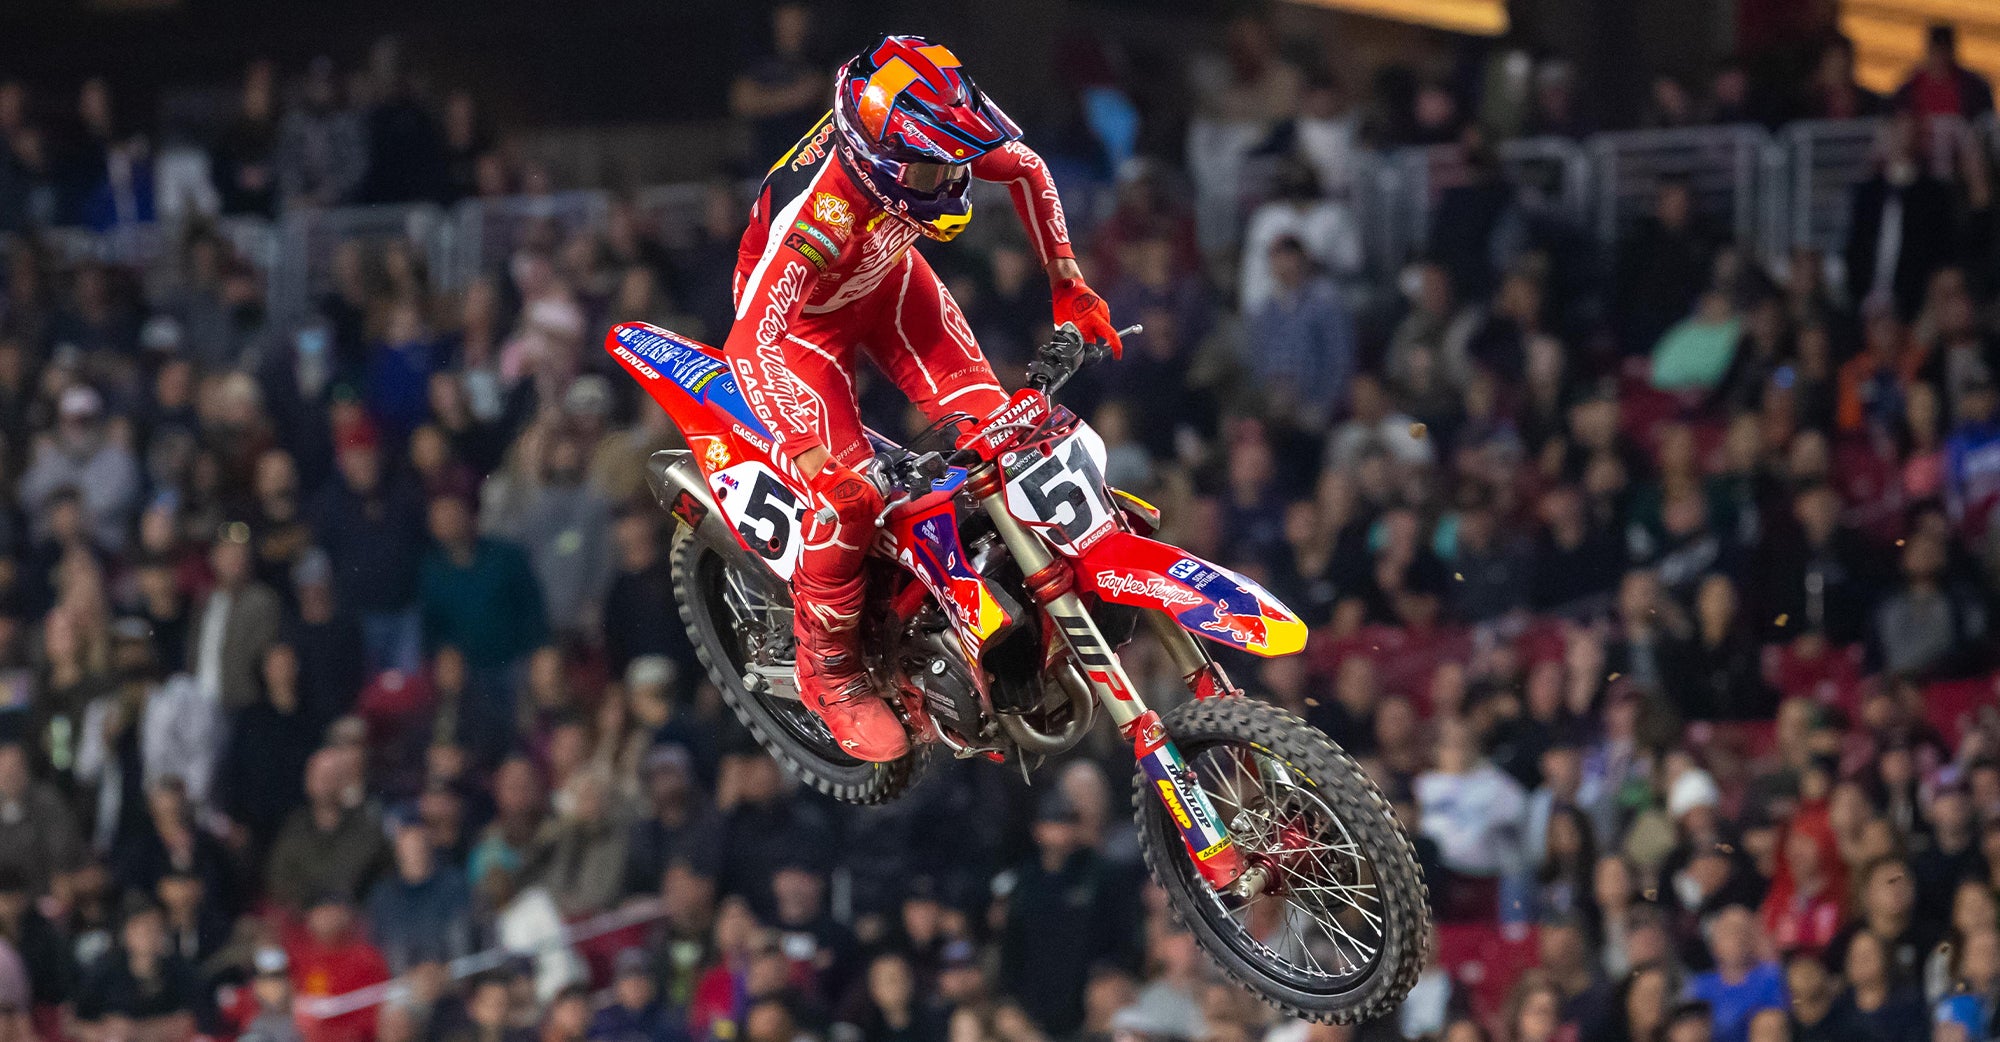 TROY LEE DESIGNS/RED BULL/GASGAS FACTORY RACING TAKE THE POSITIVES FRO – Troy  Lee Designs